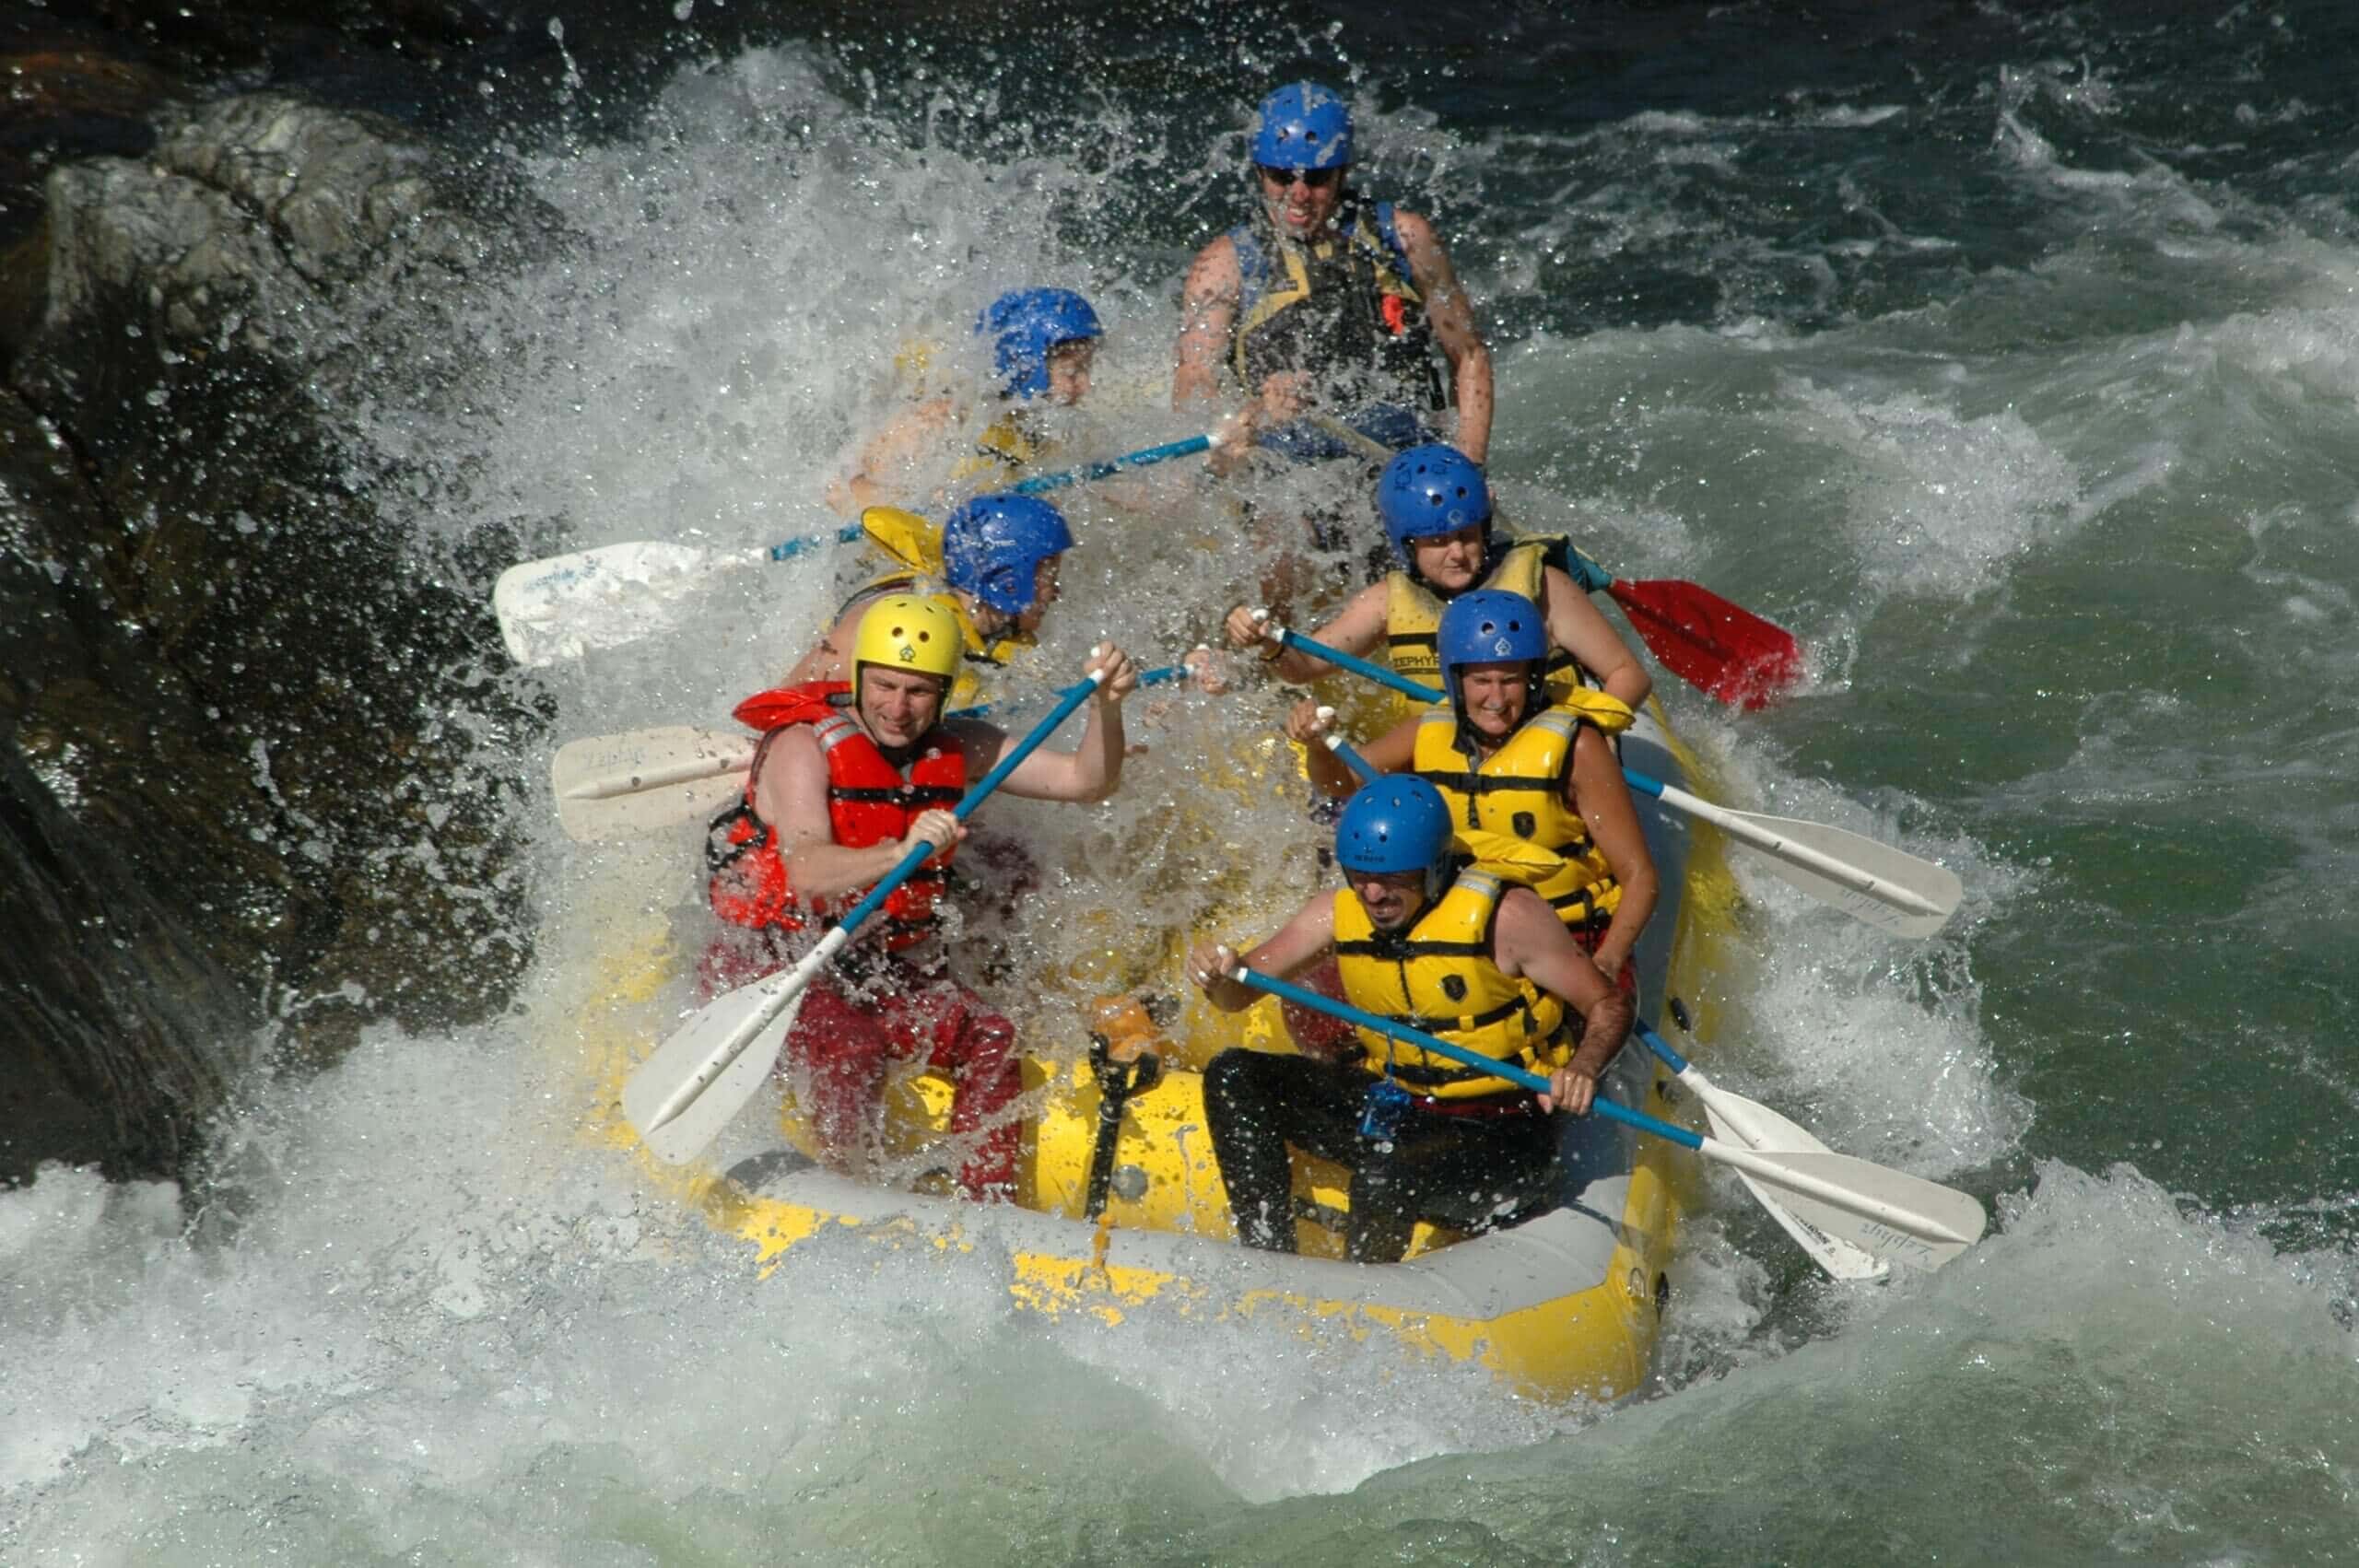 Stanislaus National Forest rafting